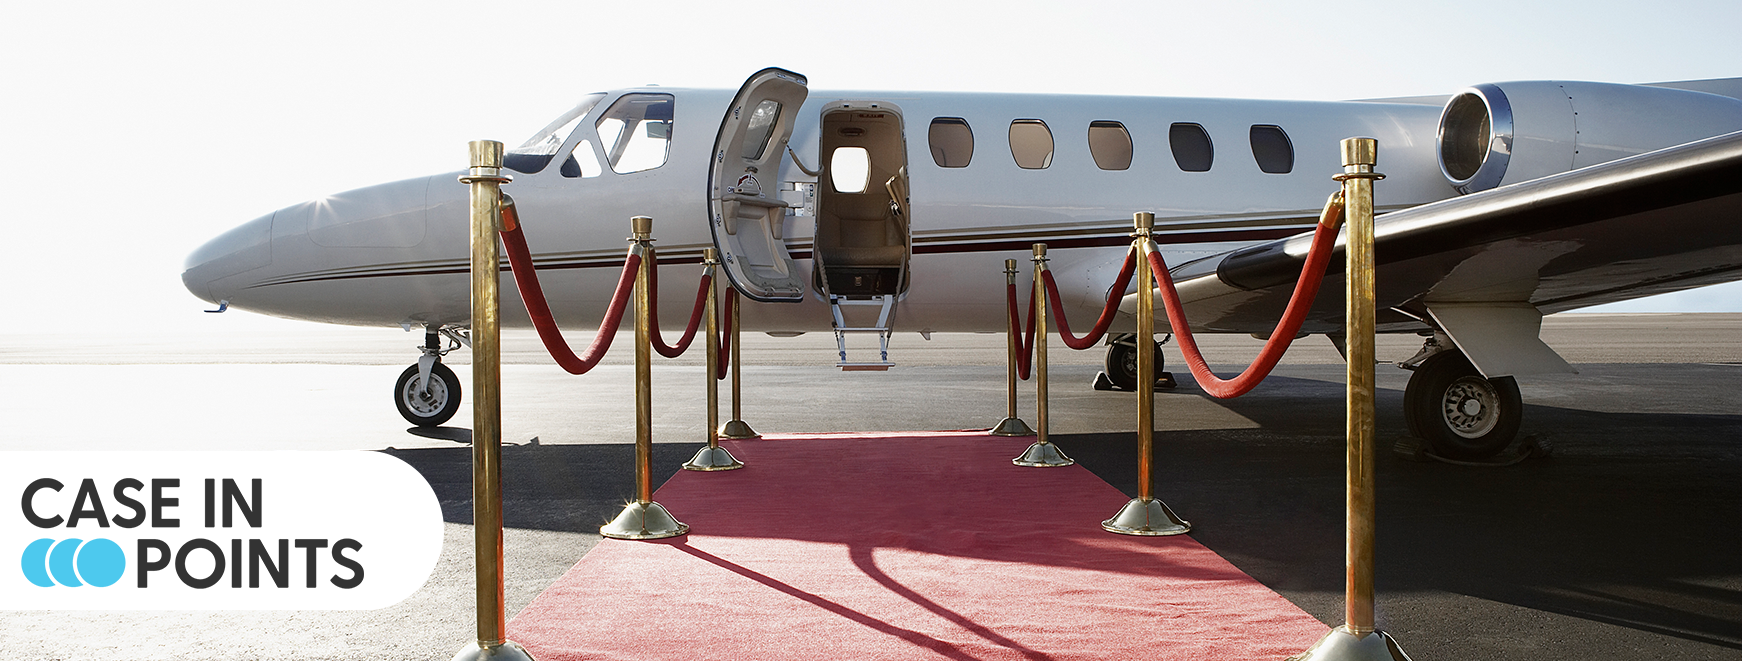 Case in Points. Airplane with red carpet and roping leading to cabin entry. 